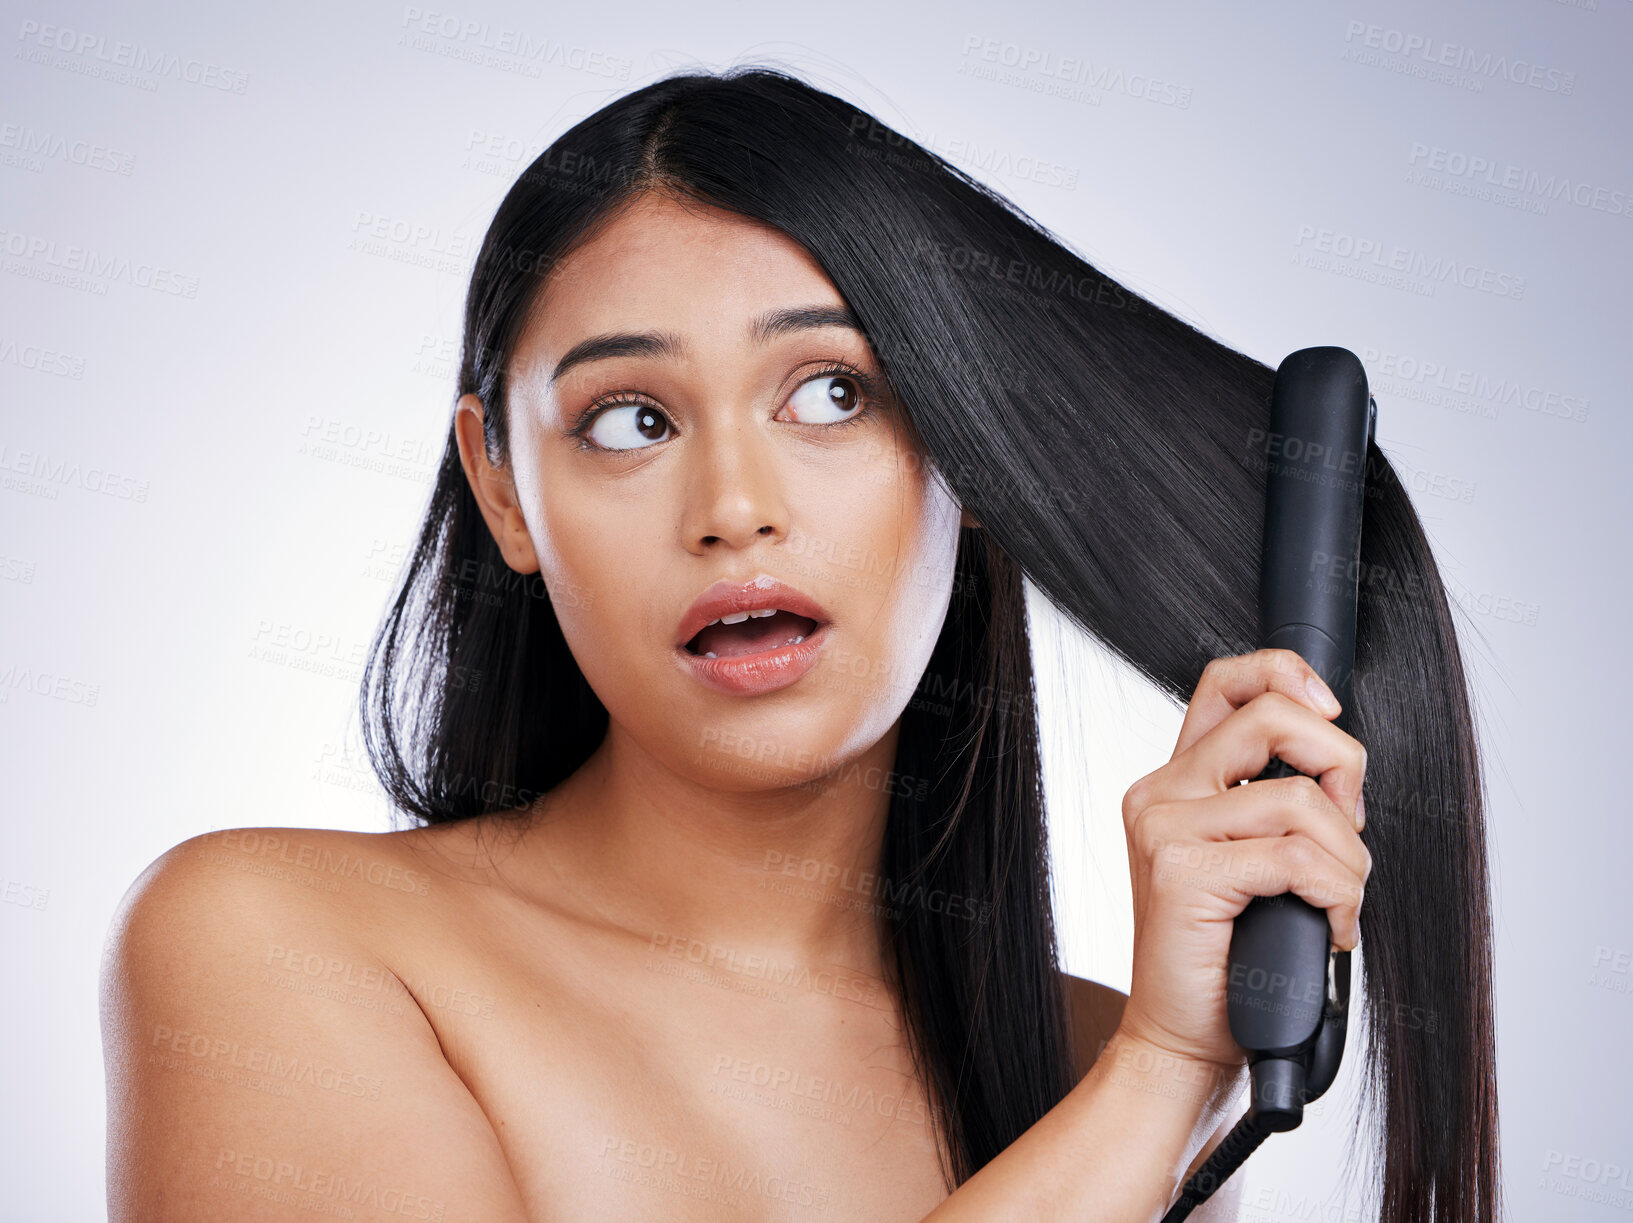 Buy stock photo Haircare, flat iron and face of woman with long hair, heat and luxury salon treatment on white background in Brazil. Beauty, straightener and latino model with straight hairstyle on studio backdrop.